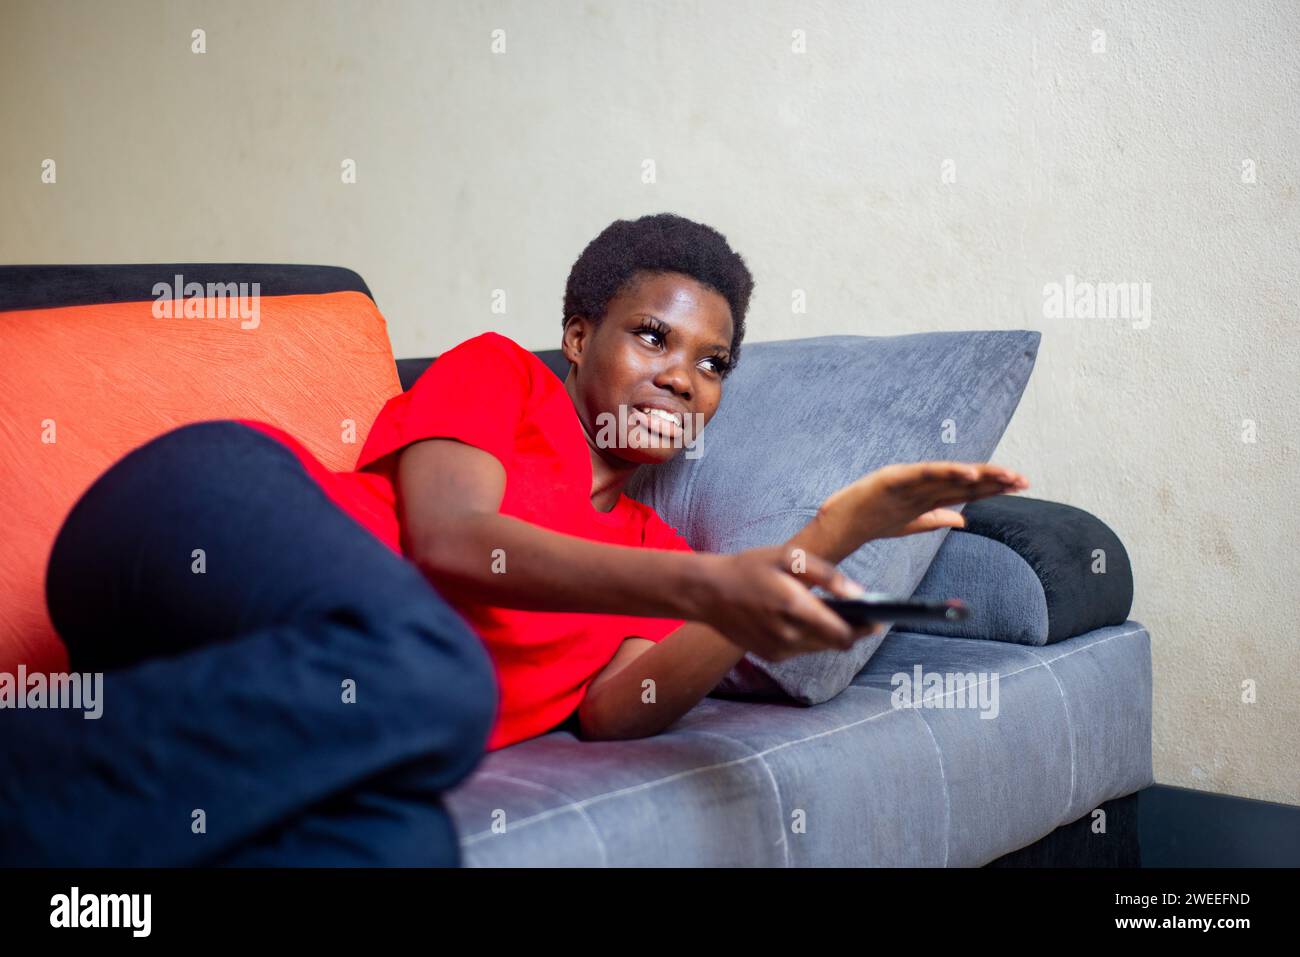 a beautiful young girl lying in a sofa at home holding a remote control looking unhappy. Stock Photo